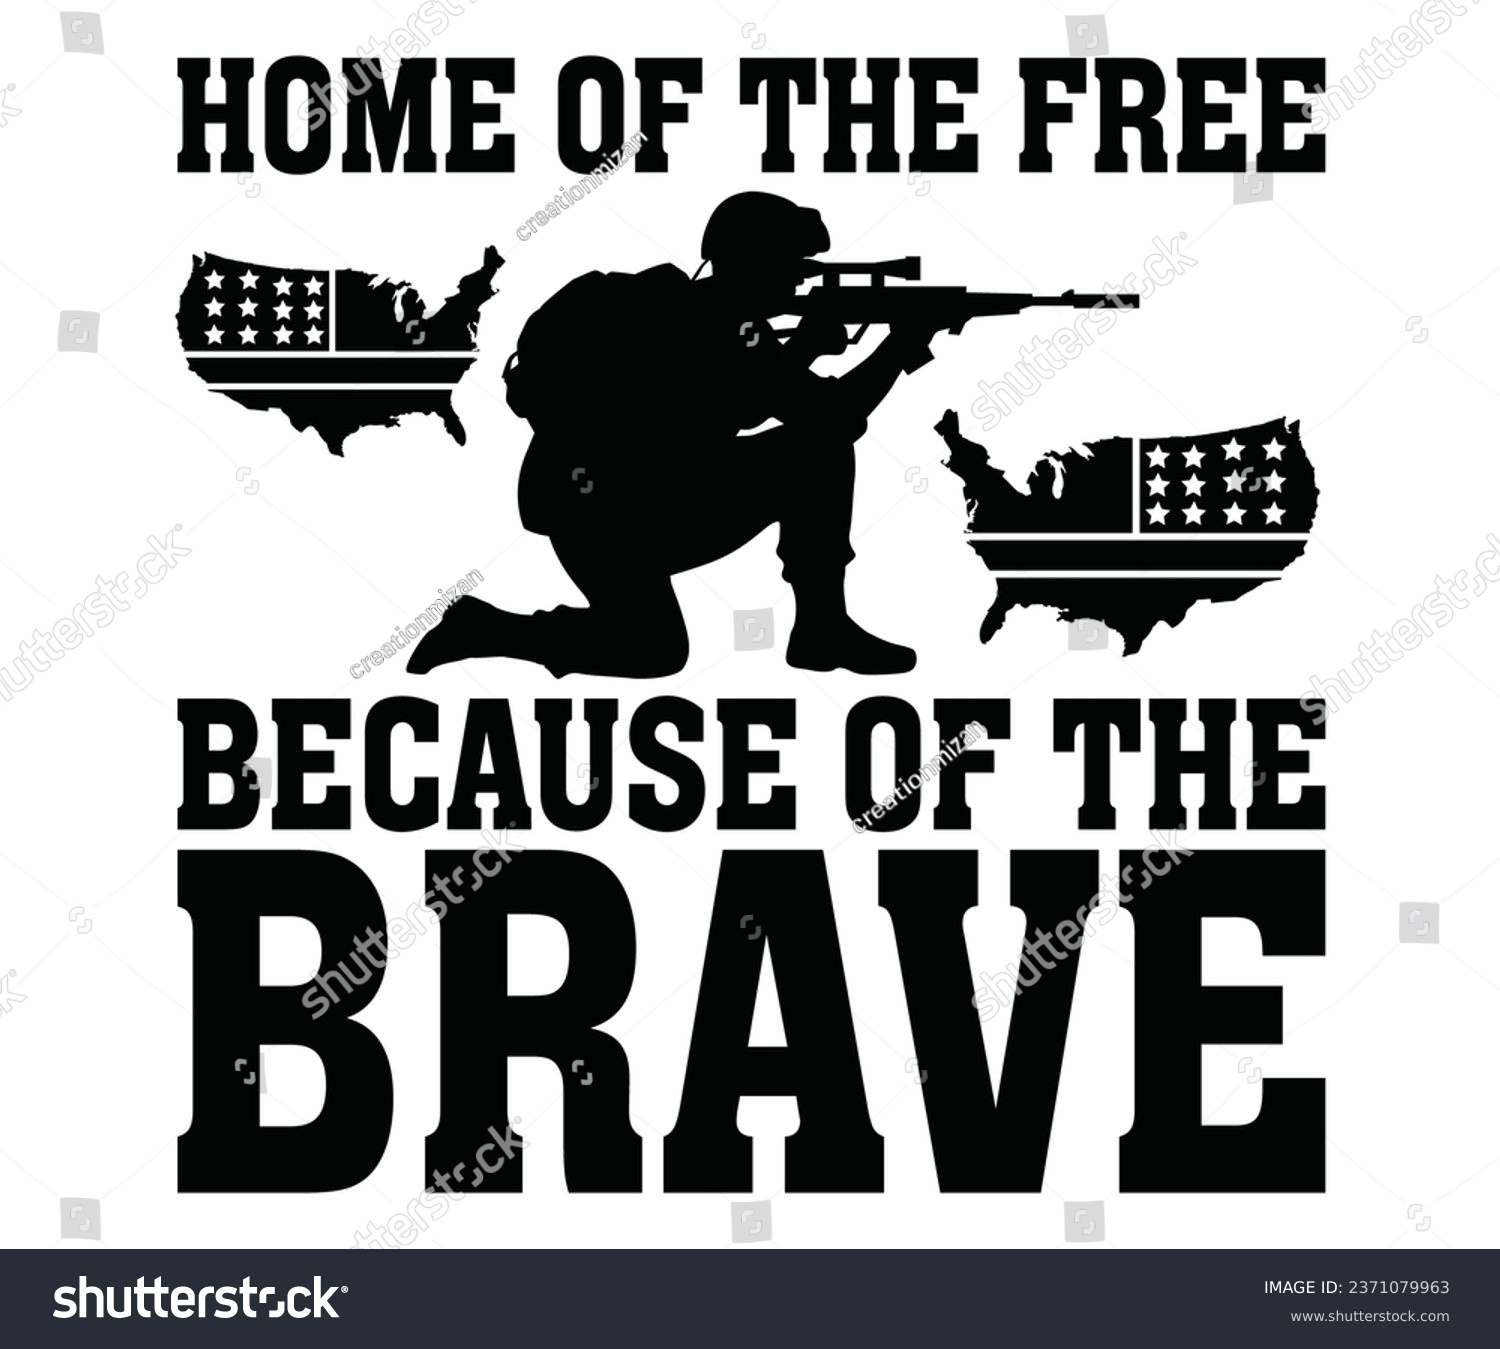 SVG of Home of the free, because of the brave Svg,Veteran Clipart,Veteran Cutfile,Veteran Dad svg,Military svg,Military Dad svg,4th of July Clipart,Military Dad Gift Idea     
 svg